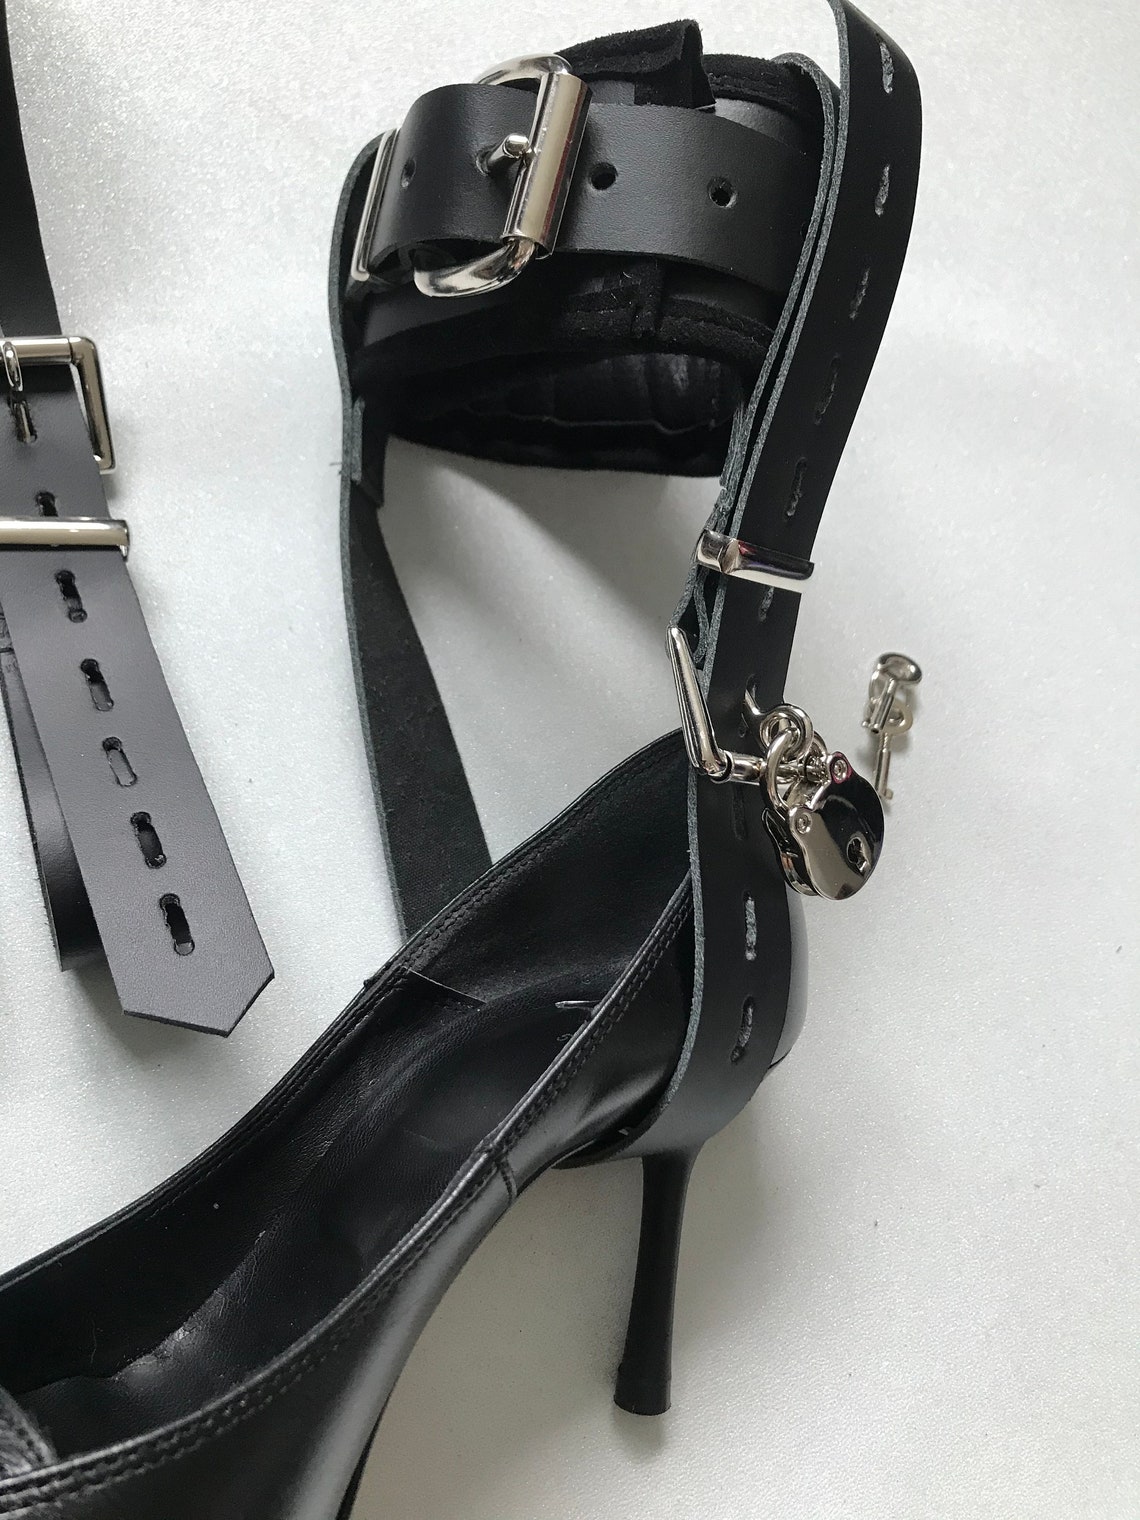 Lockable straps for high heels to lock in place and cannot be | Etsy